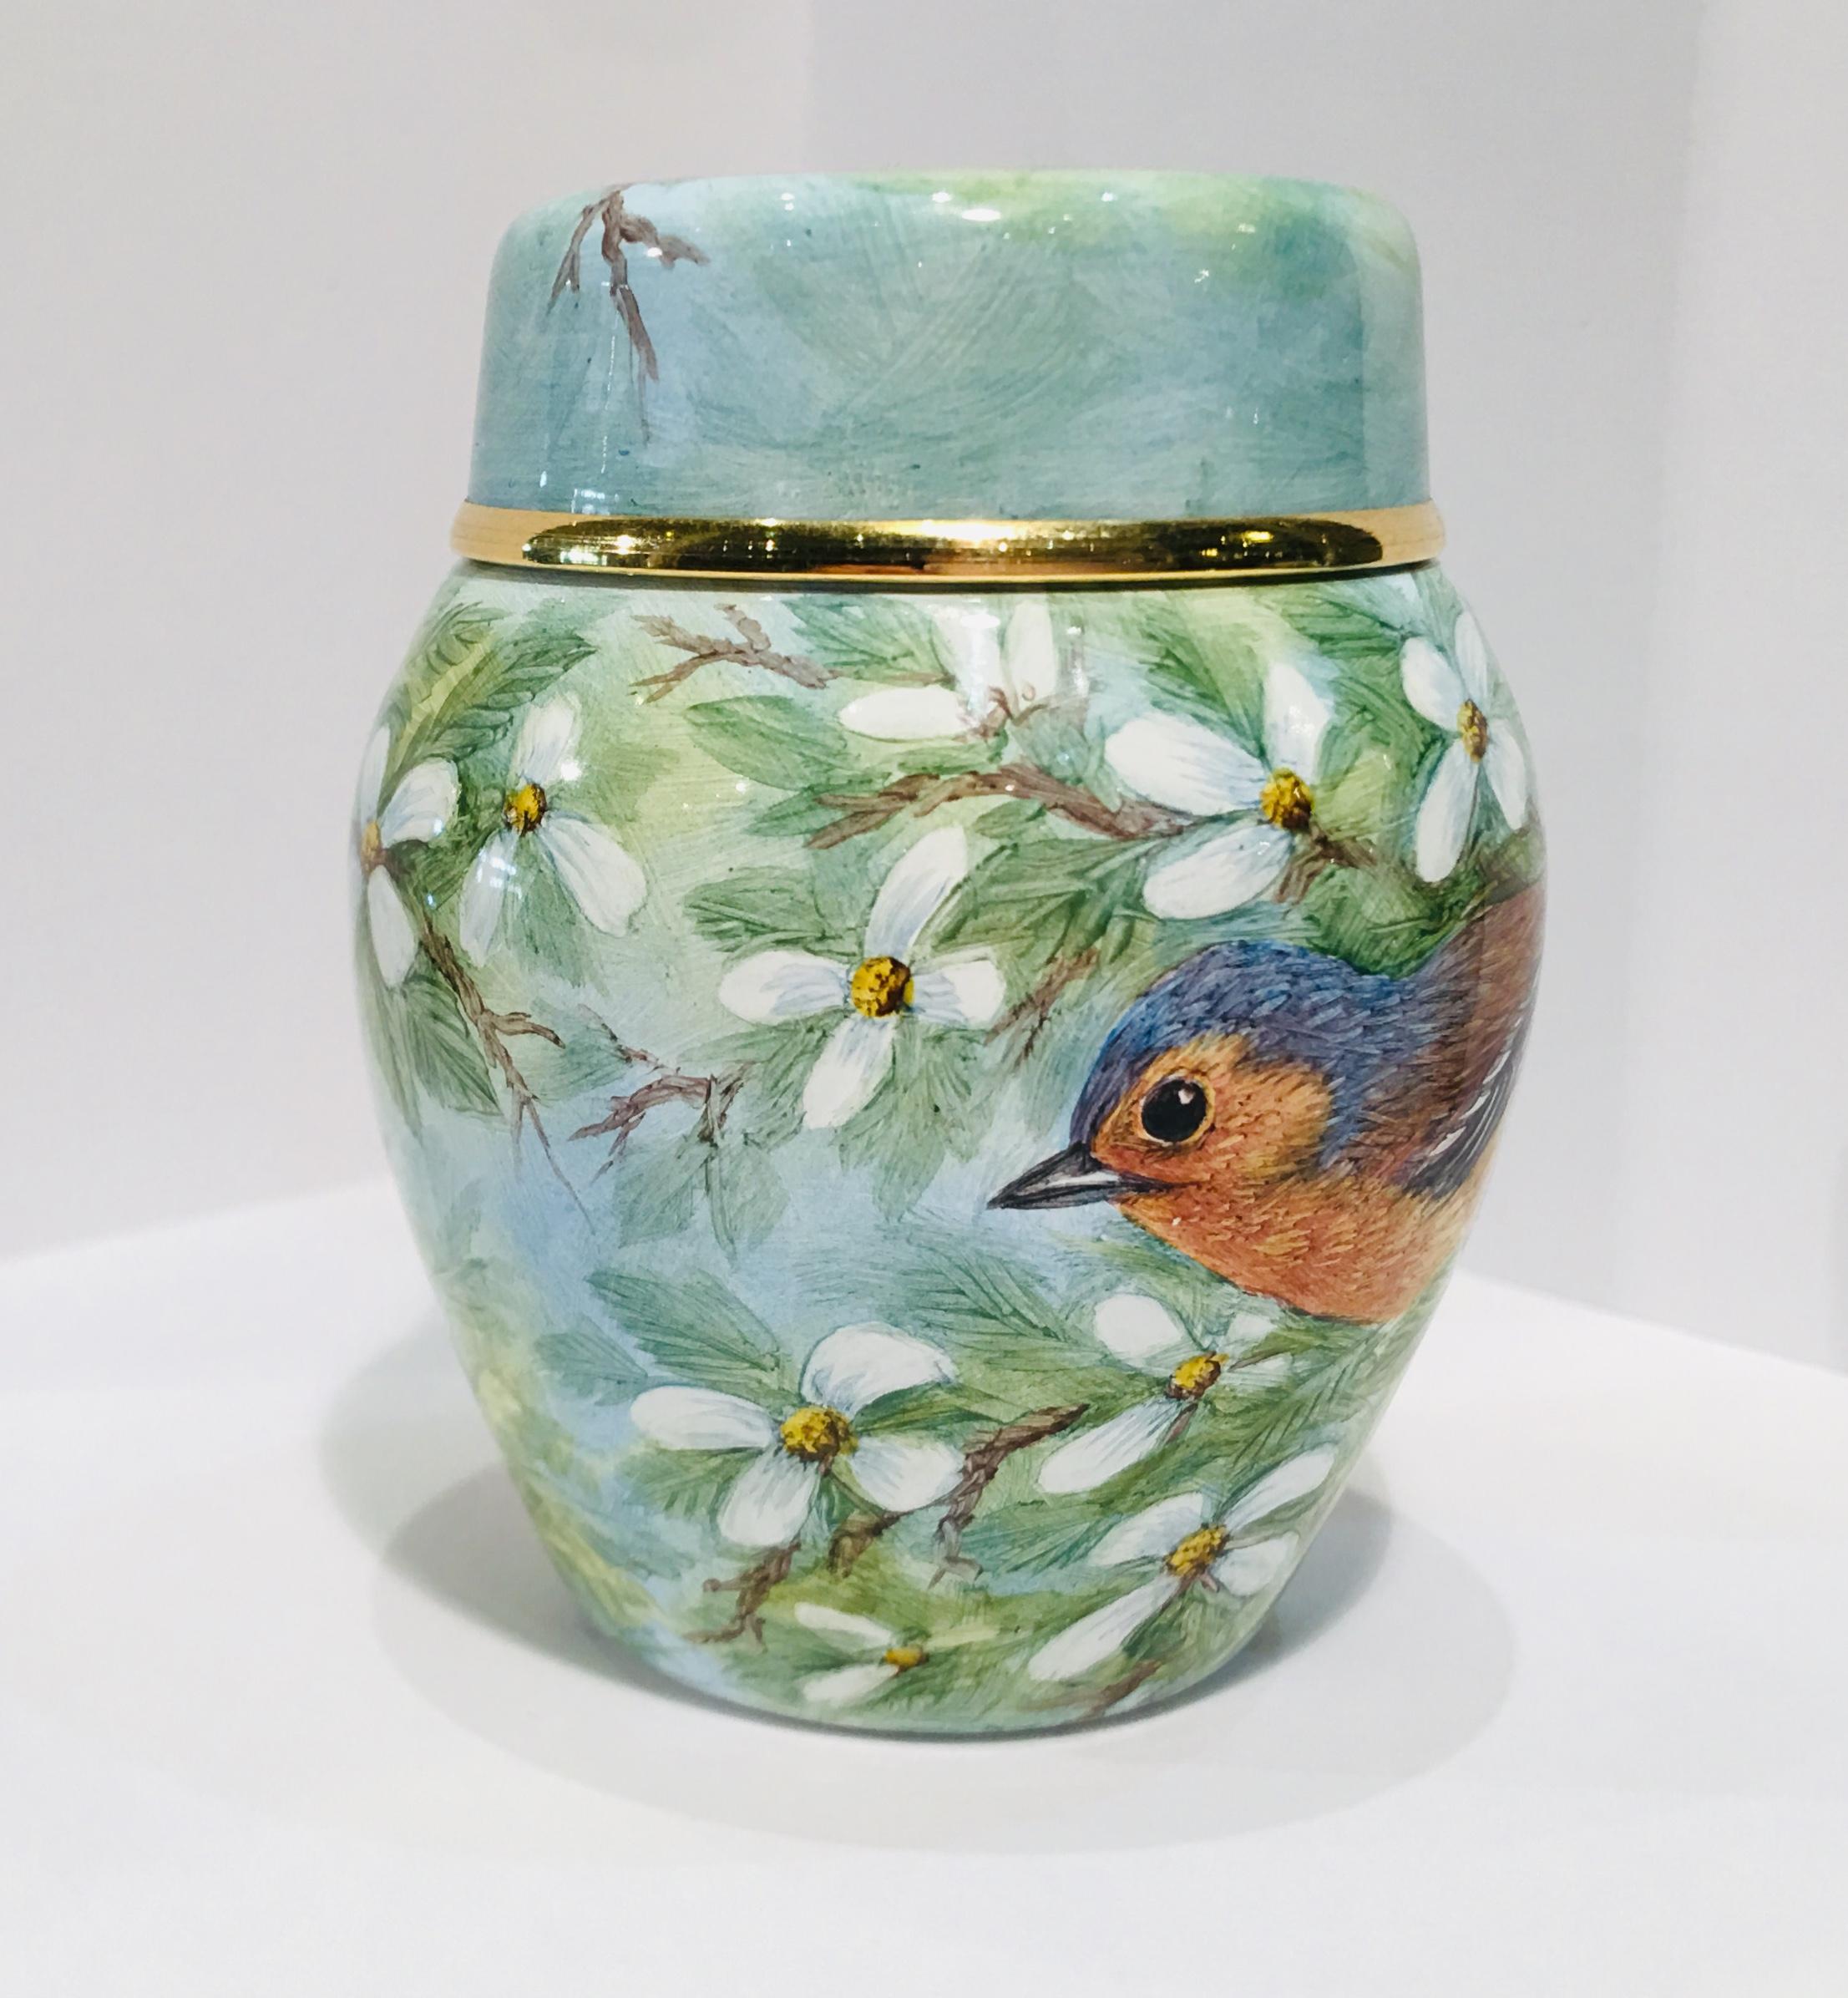 Artisan Rare Exquisite Moorcroft Enamel and Gold Limited Edition Miniature Ginger Jar